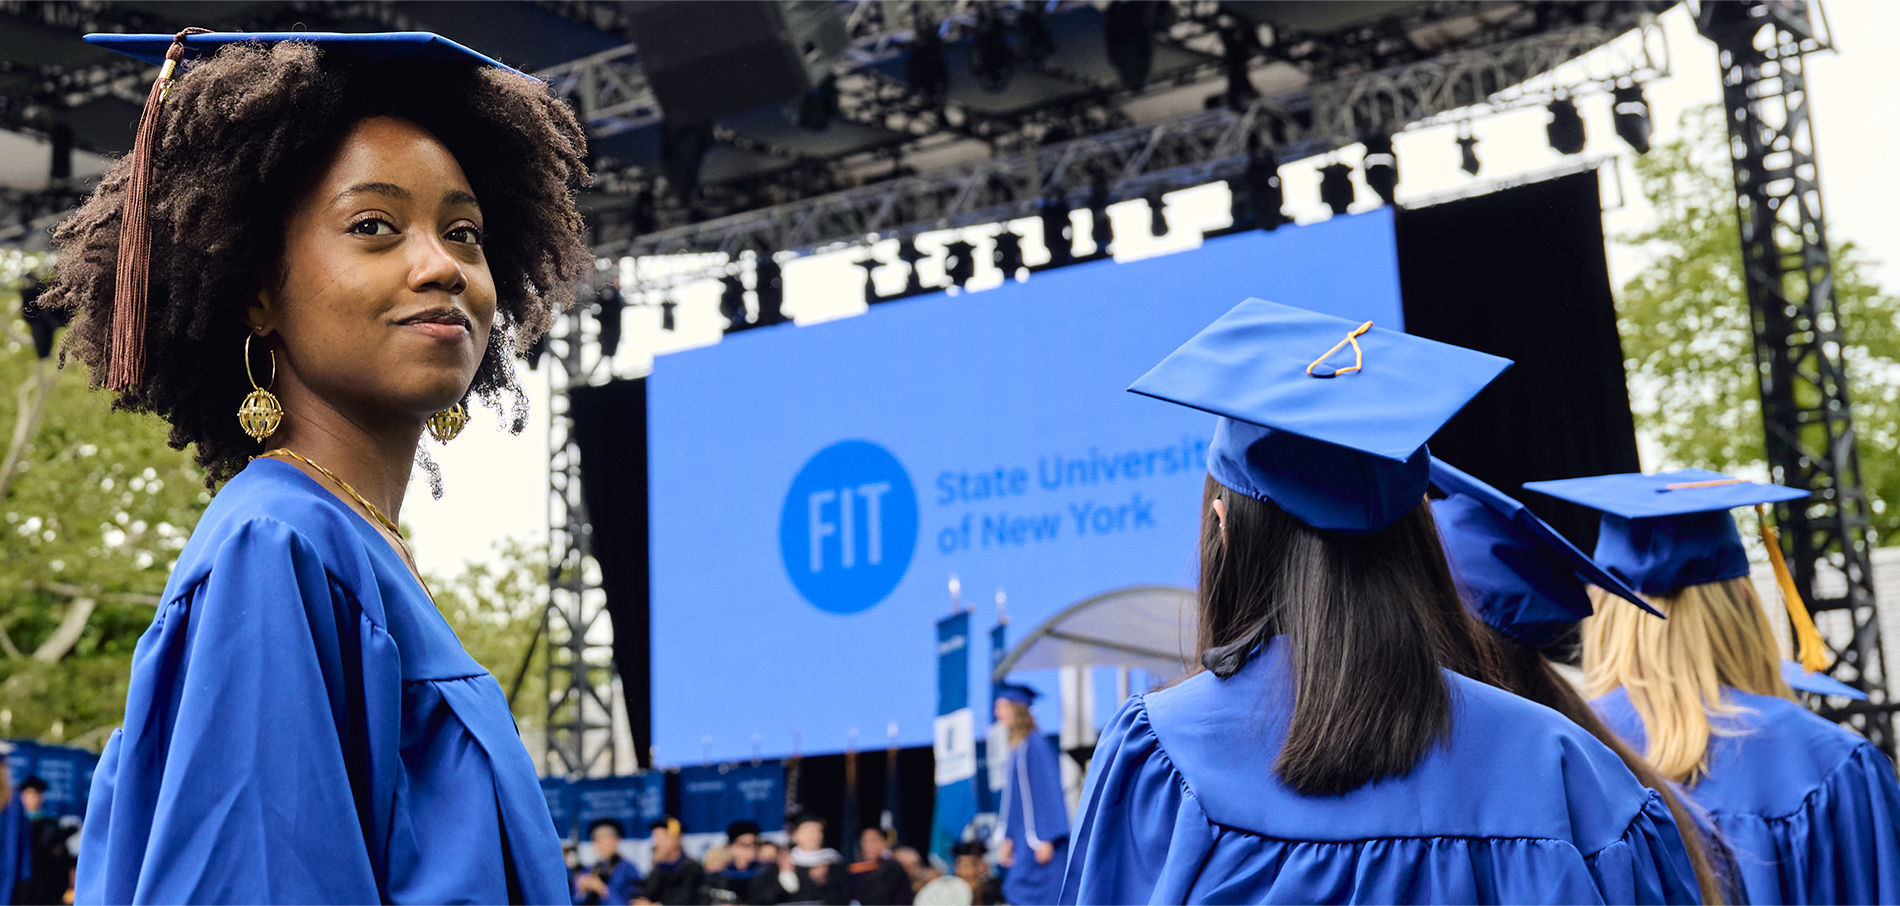 FIT commencement ceremony at Central Park